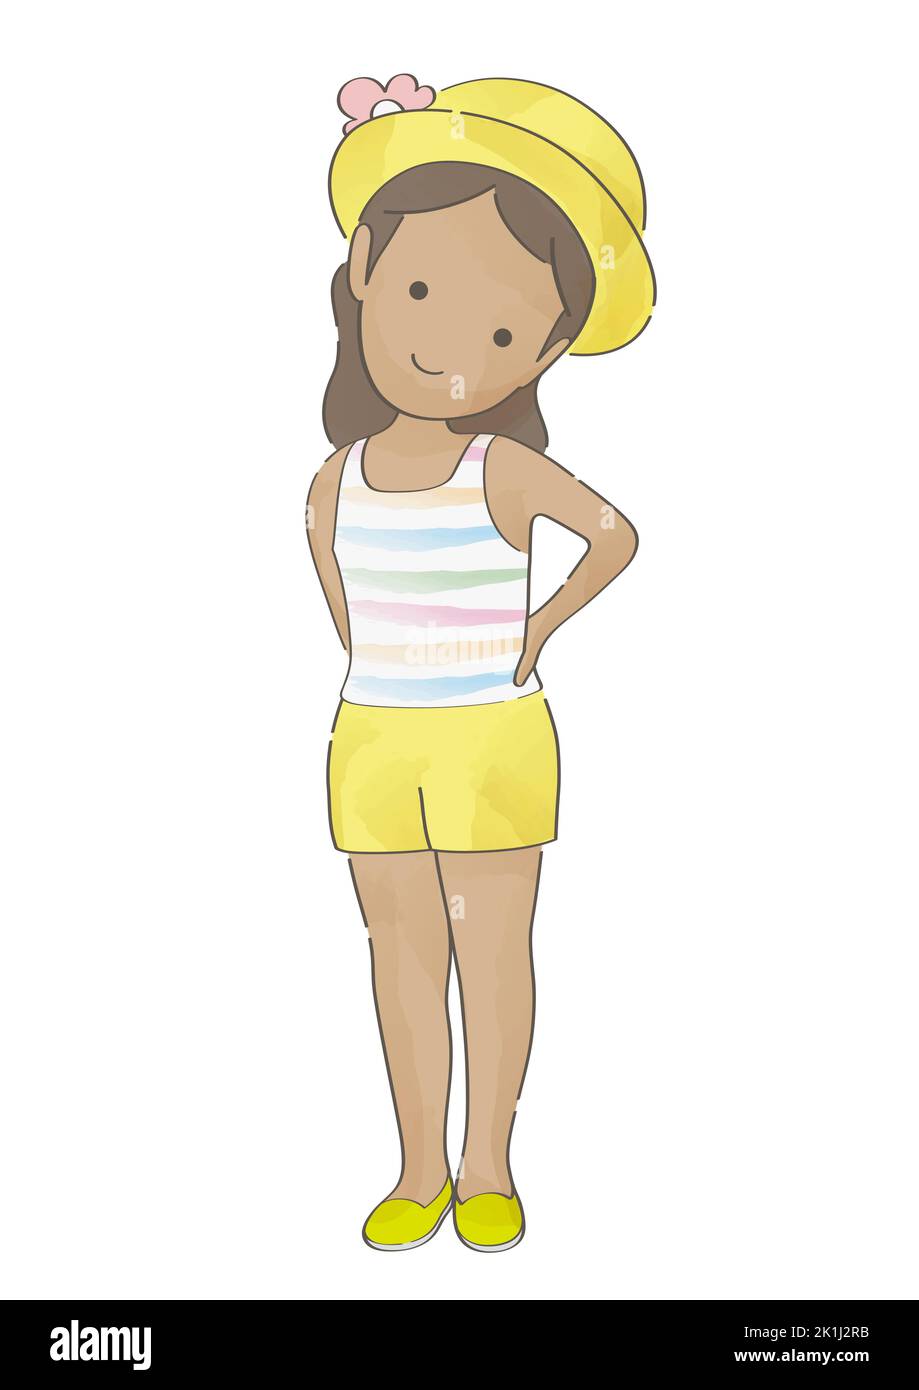 Watercolor Cute Girl Wearing A Yellow Hat. Vector Illustration Isolated On A White Background. Stock Vector